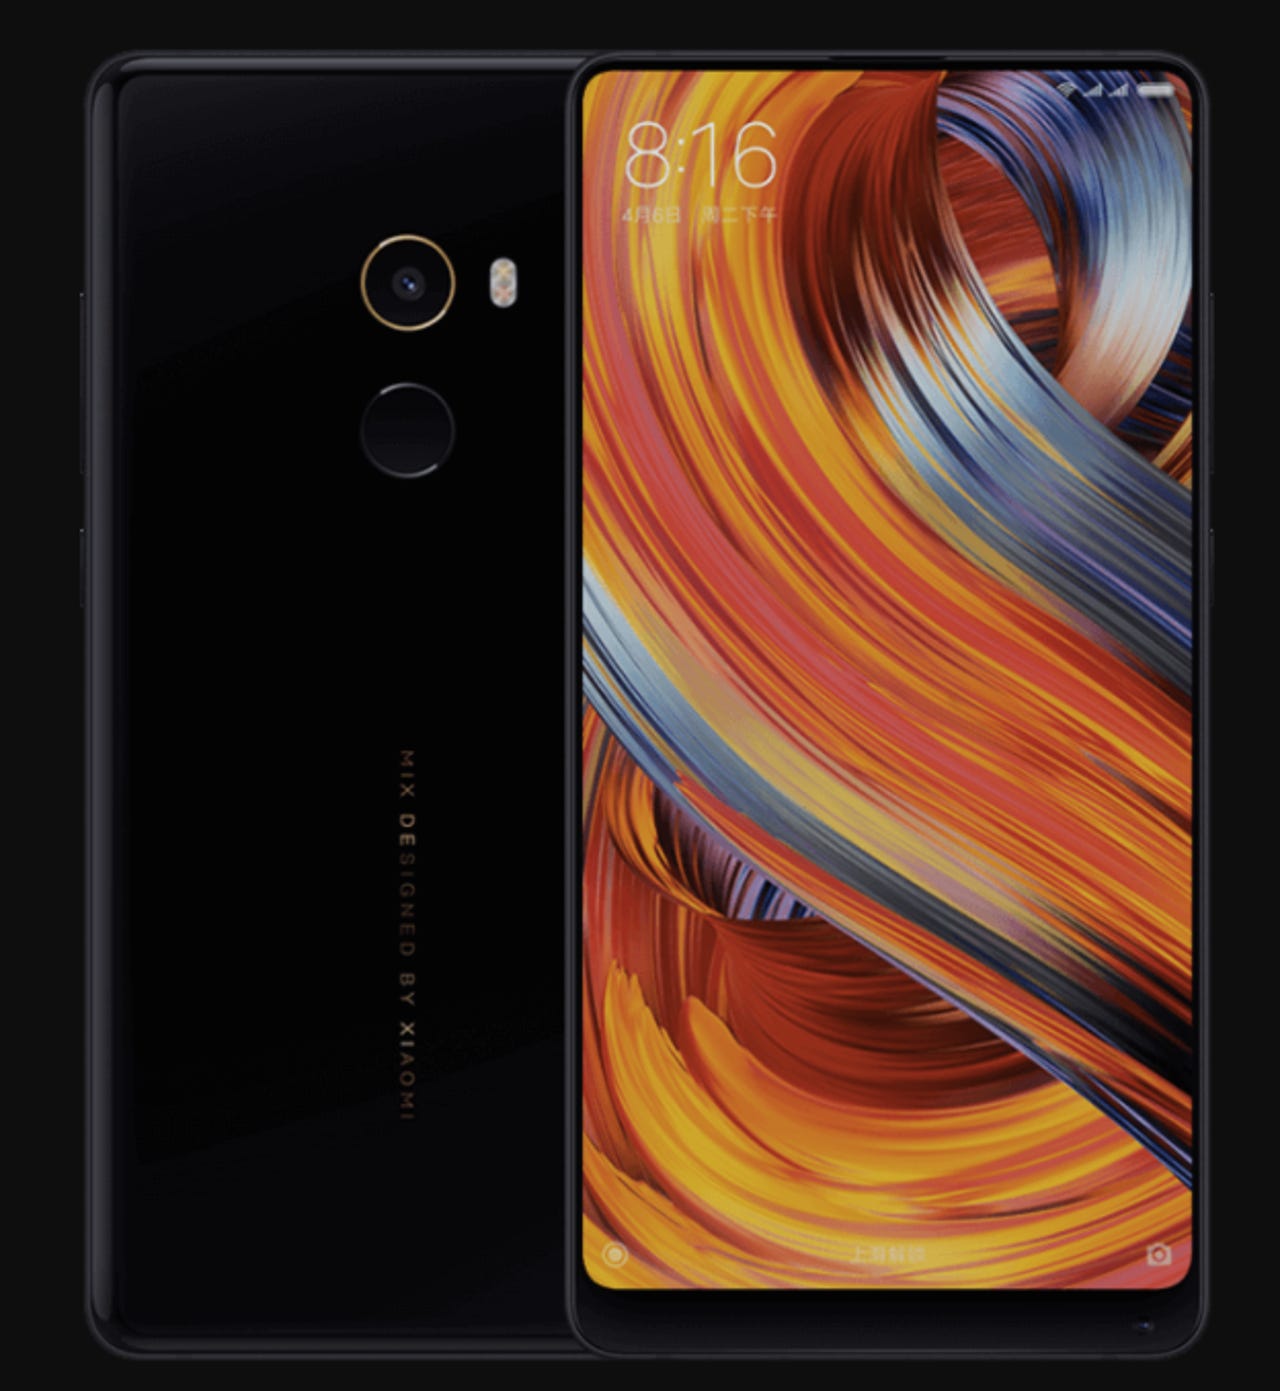 iPhone rival? Xiaomi goes ceramic again for $500 high-end Mi Mix 2